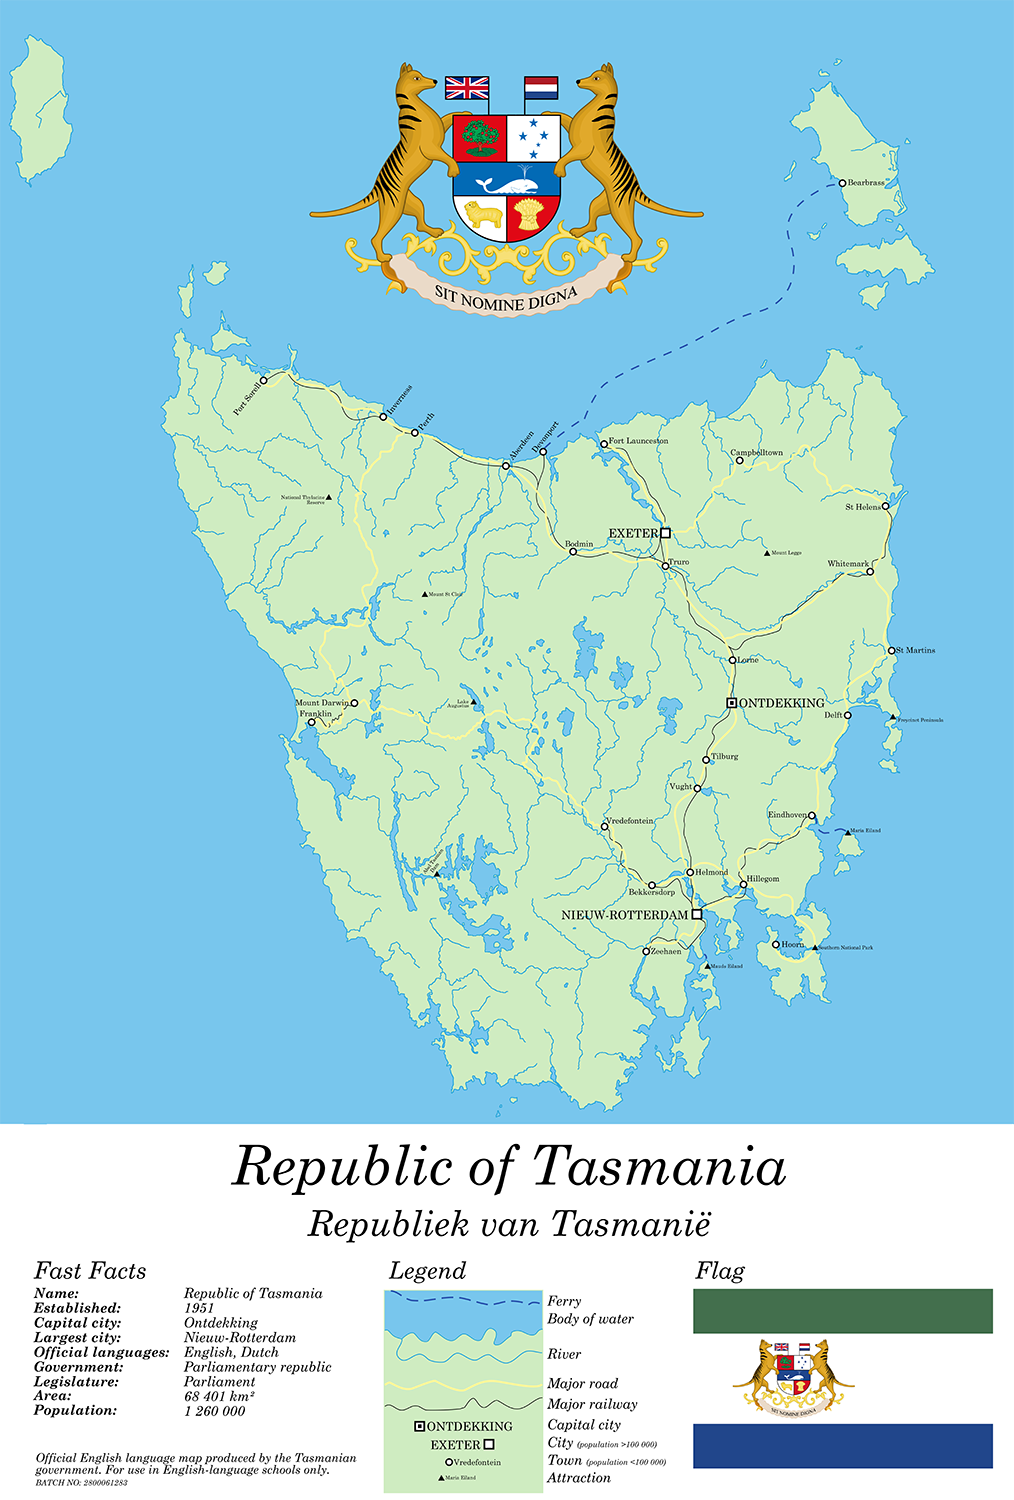 small_version_of_tasmania_map_by_kaiseremu-dcp2l5e.png